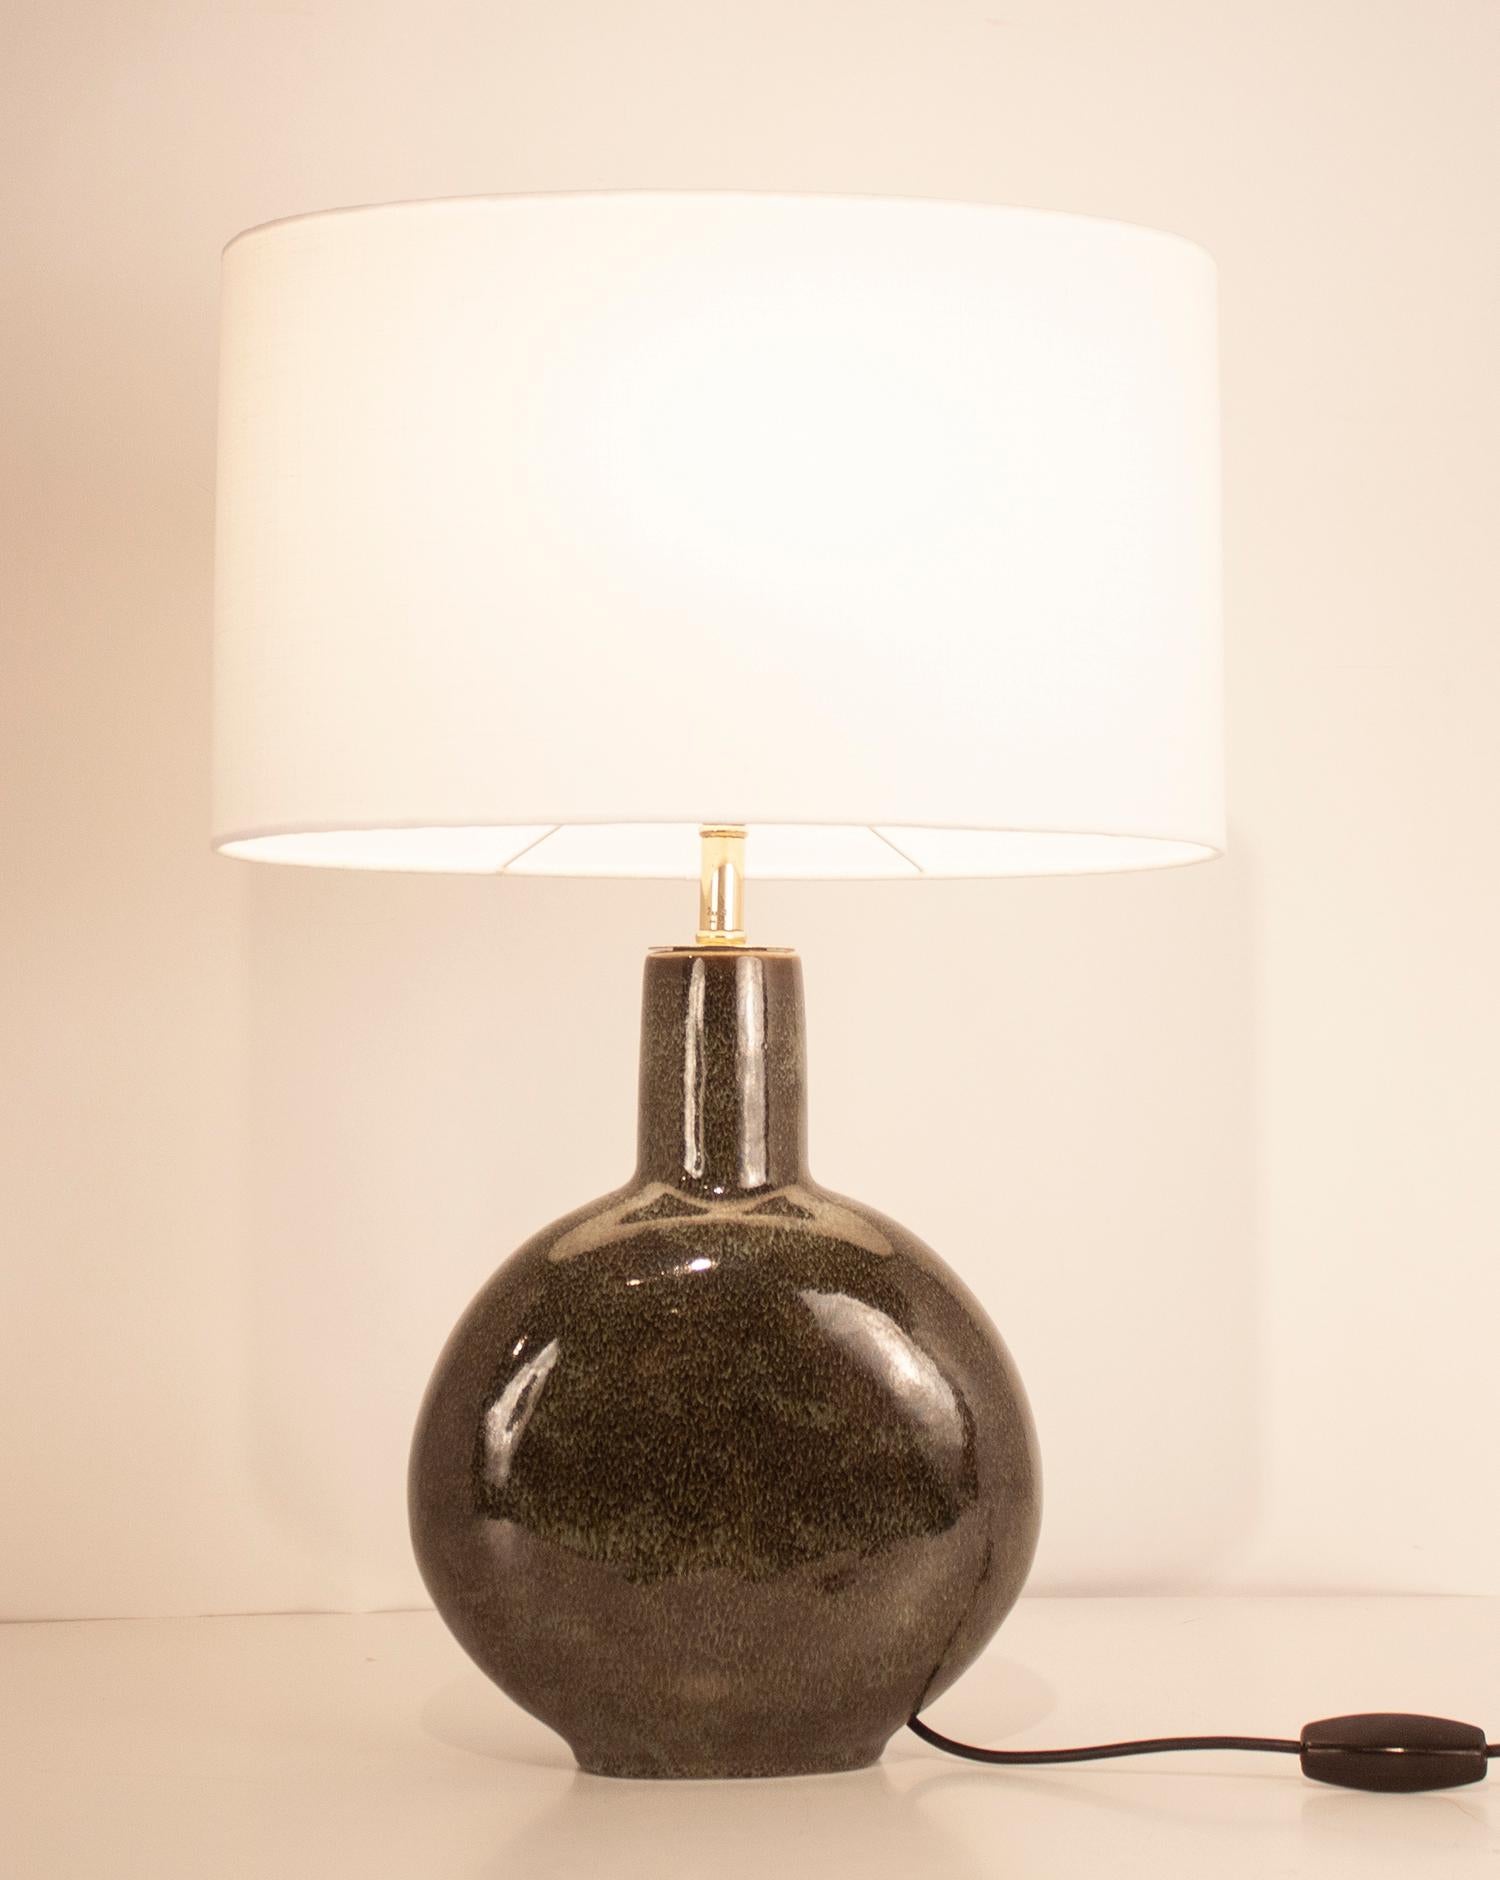 Late 20th Century Mid-century Modern, Green Ceramic and Brass Table Lamp by Valenti, Spain 1970s For Sale